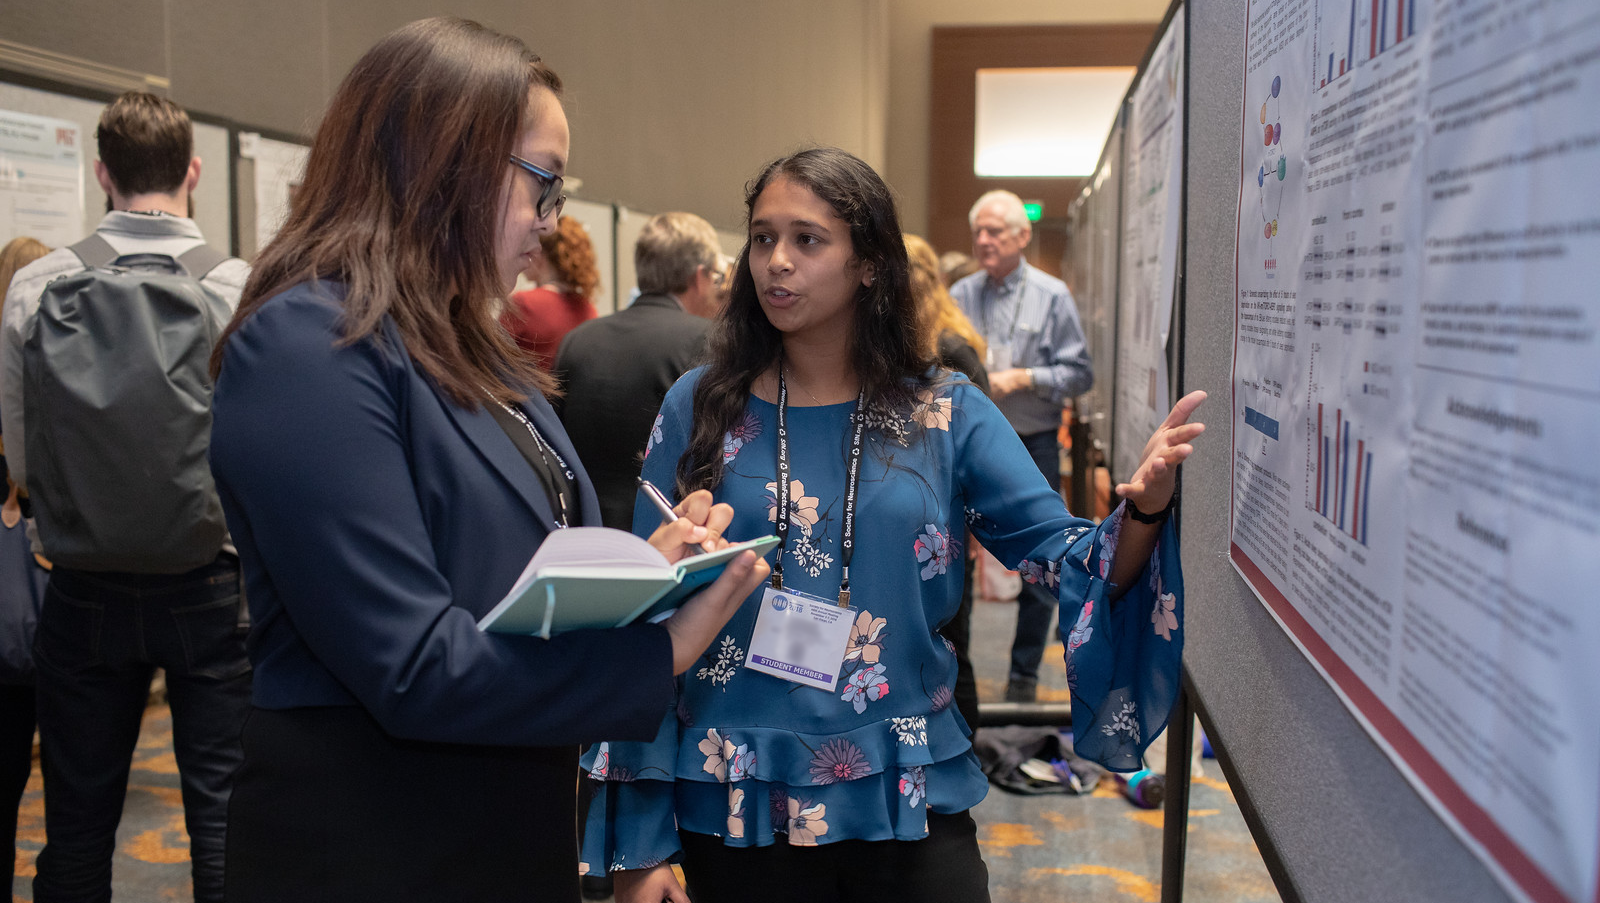 Student Member presenting a poster at Neuroscience 2018